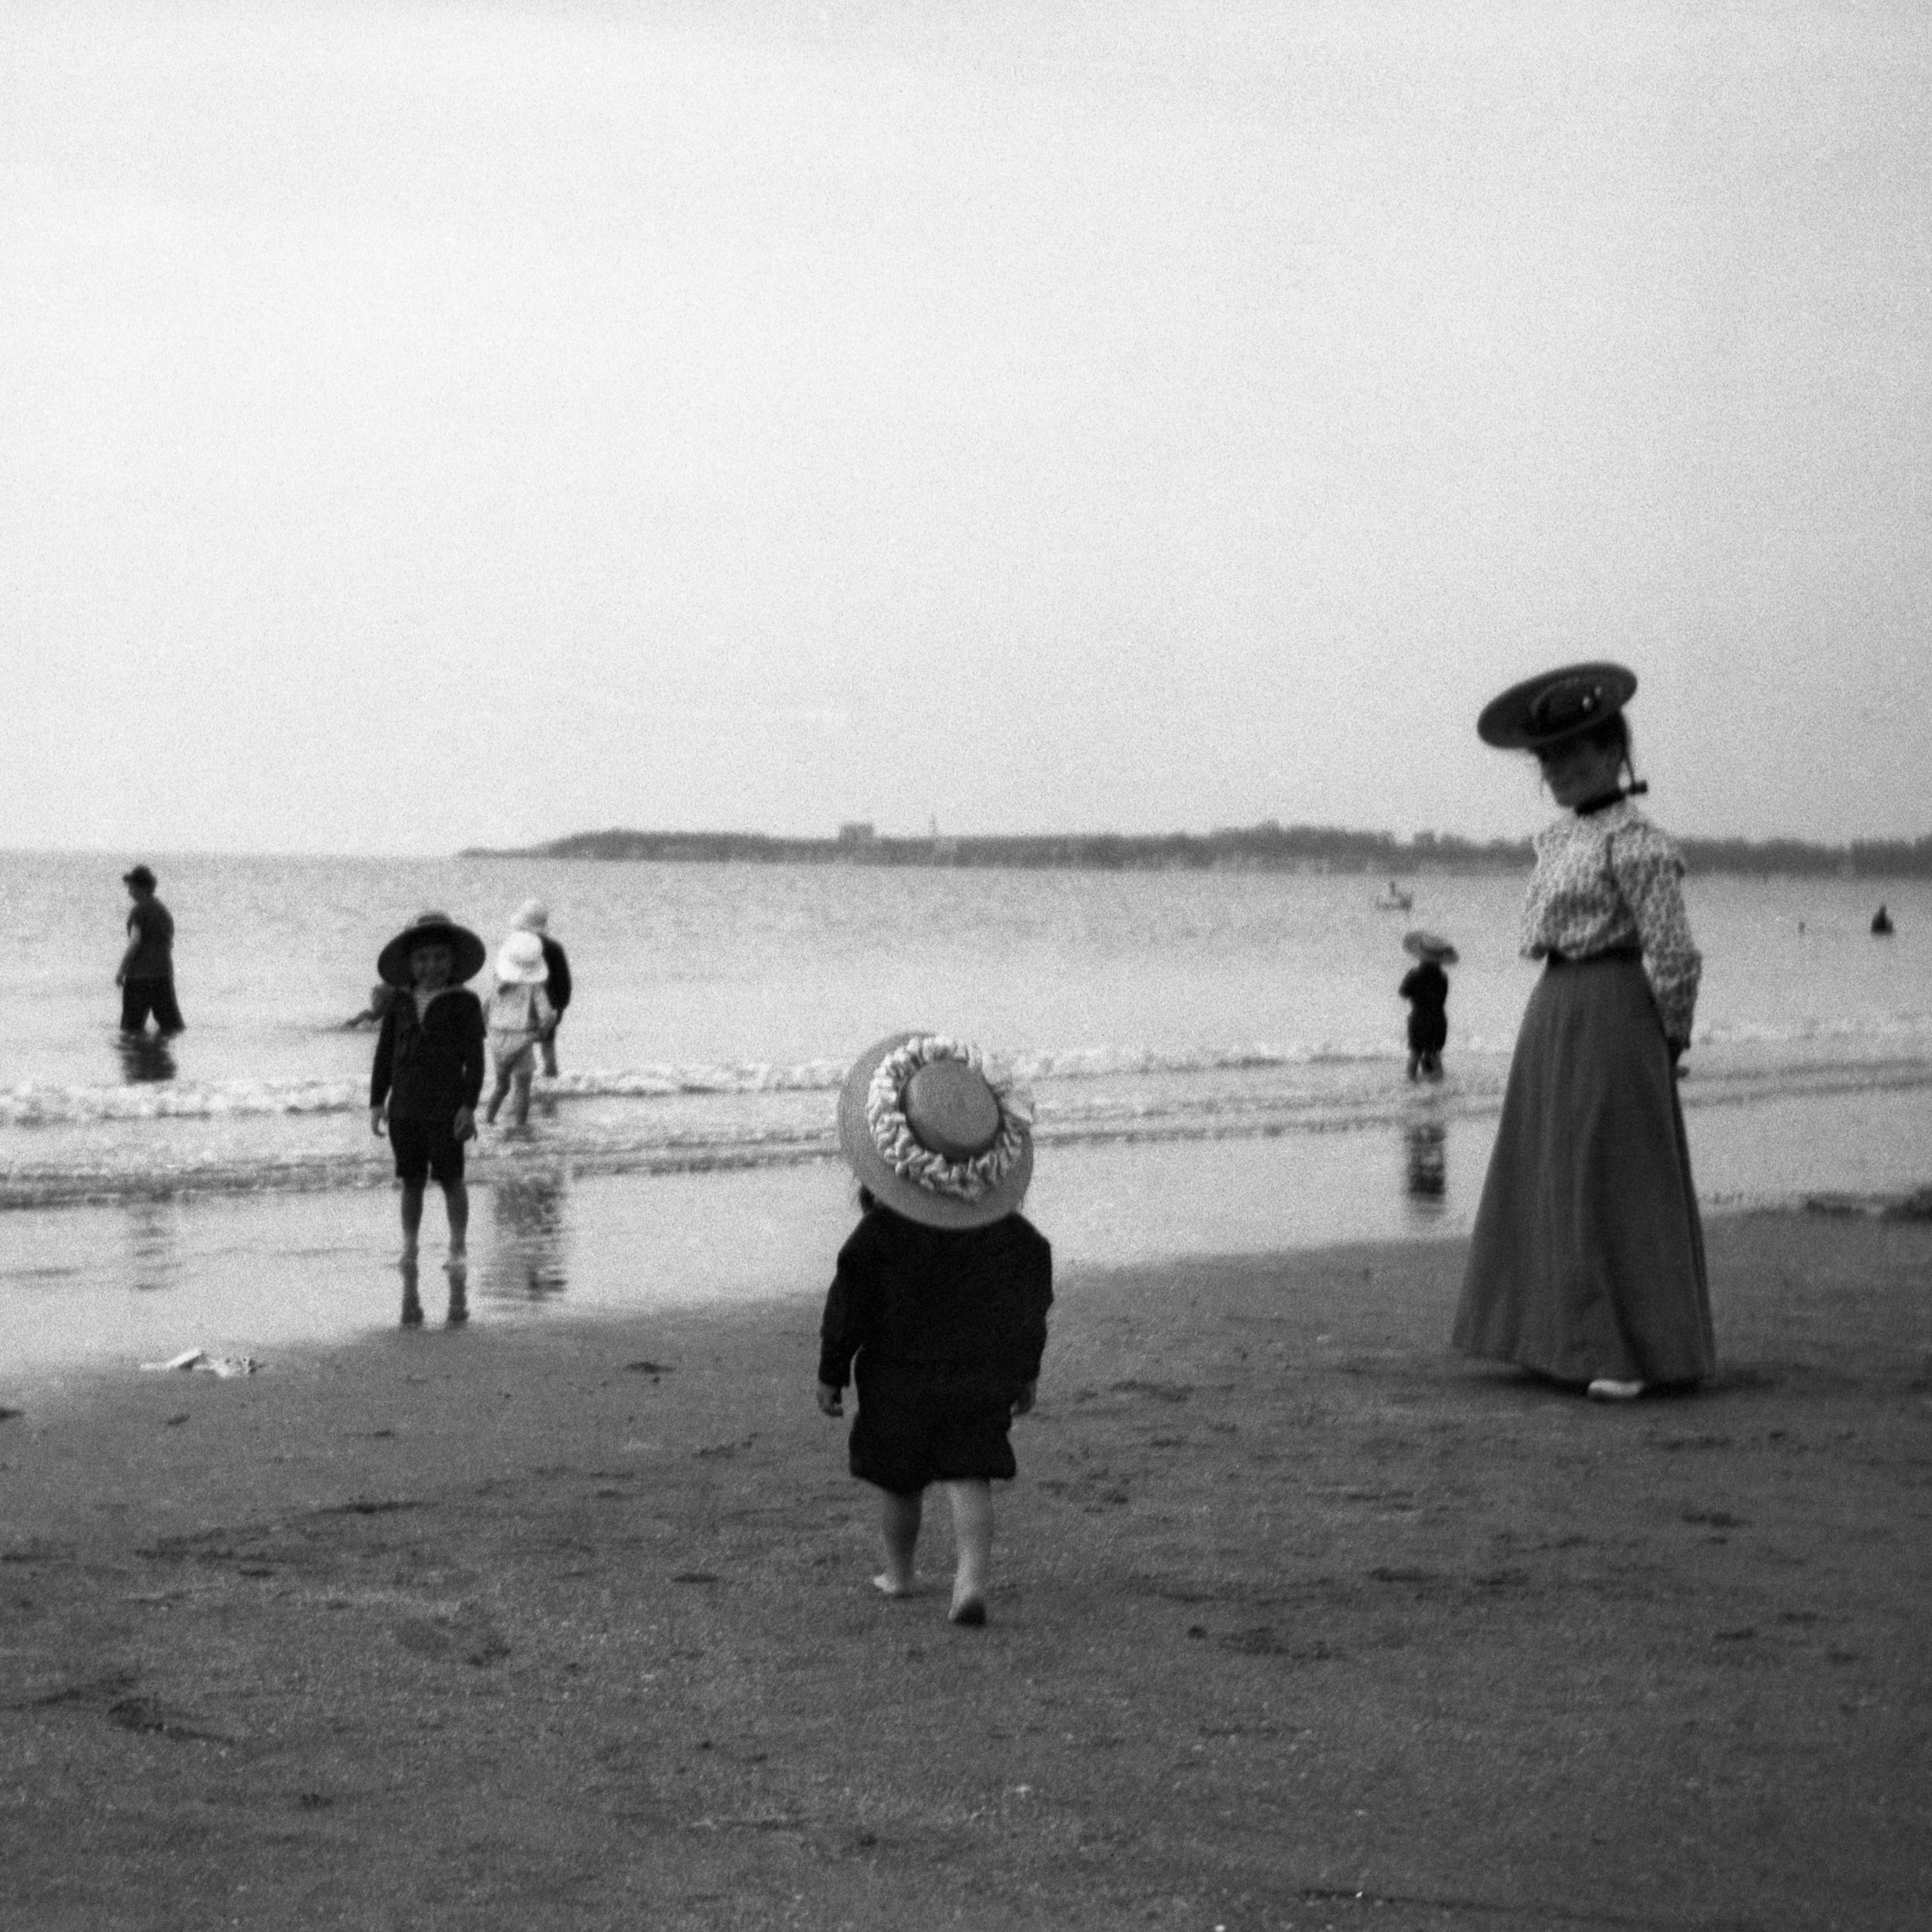 The beach at Royan, France in 1903. Scanned from a glass plate negative.